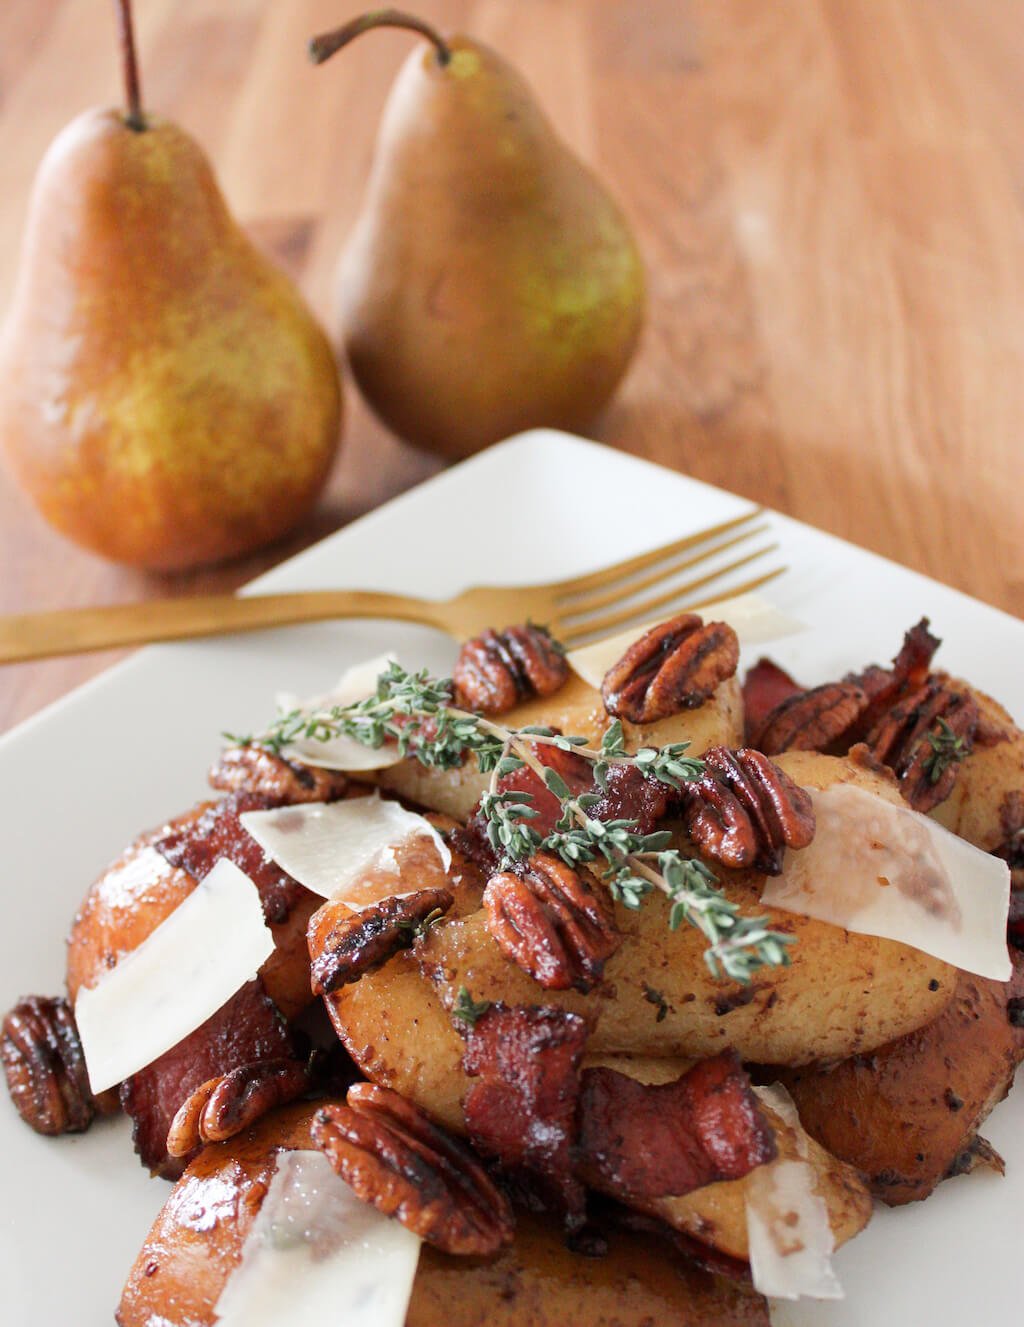 Savory Bosc Pear Salad with Bacon & Toasted Pecans - The Produce Moms